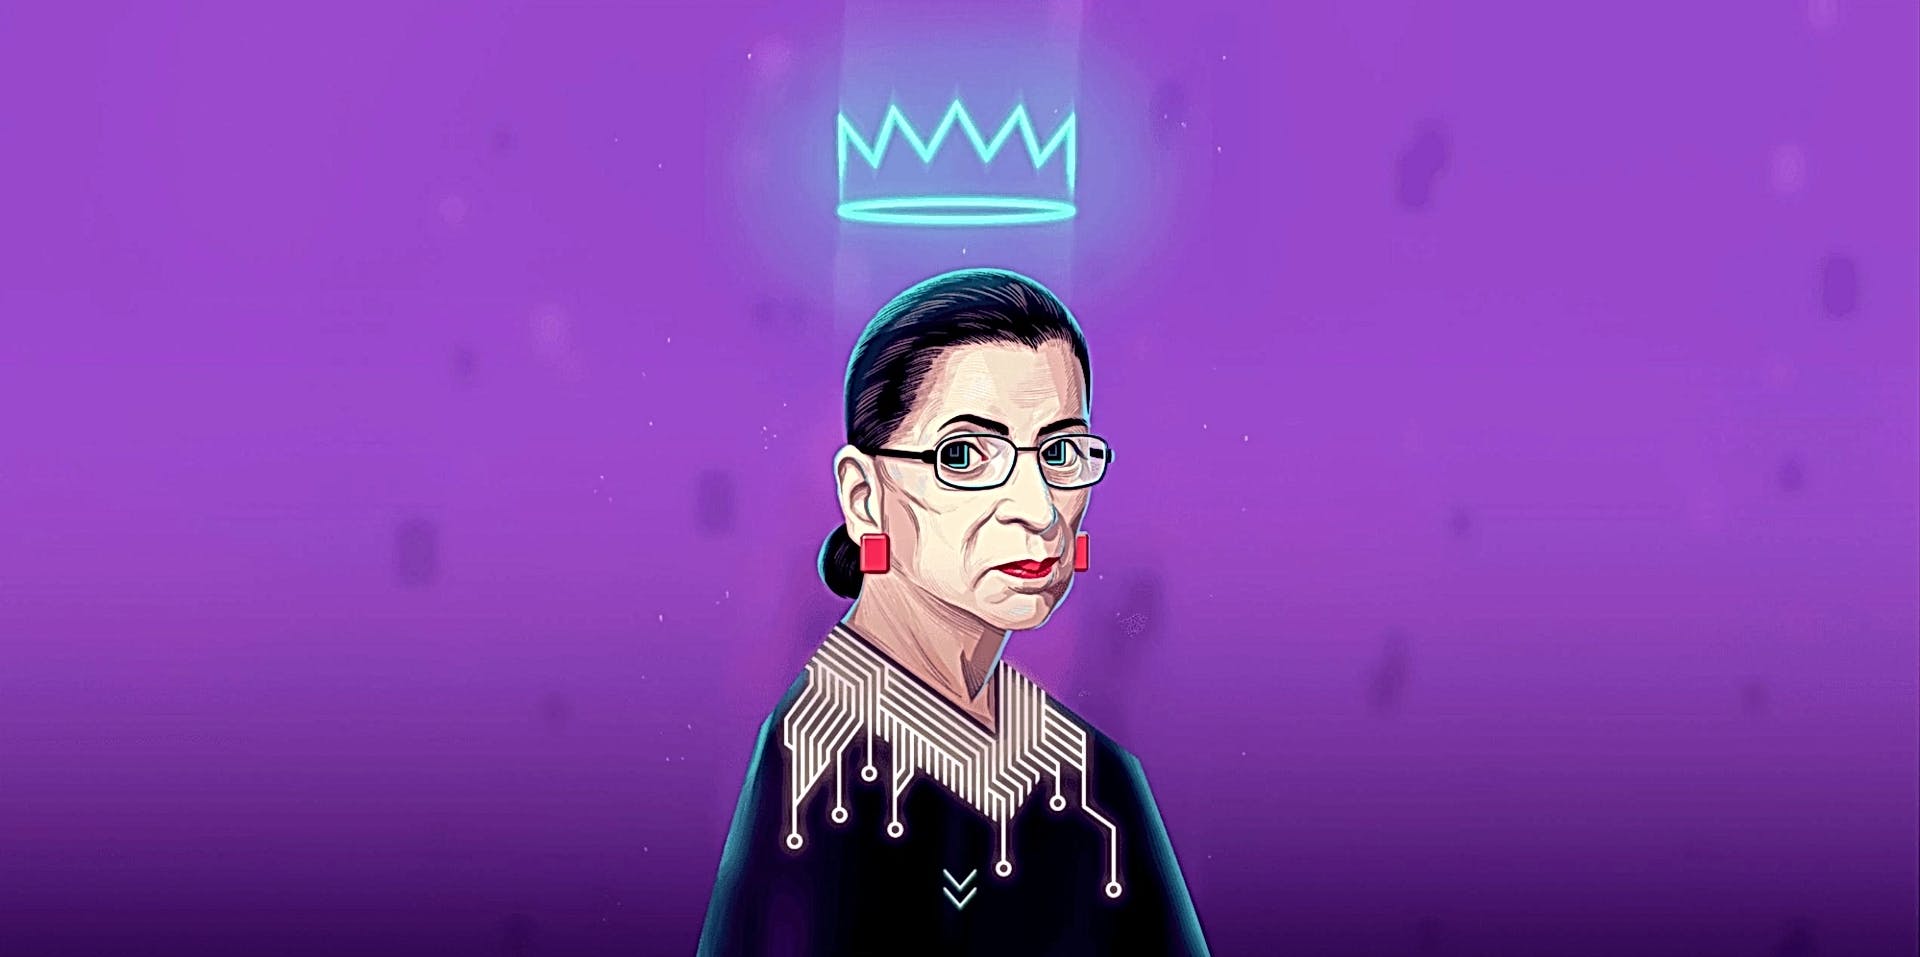 Ask-rbg featured